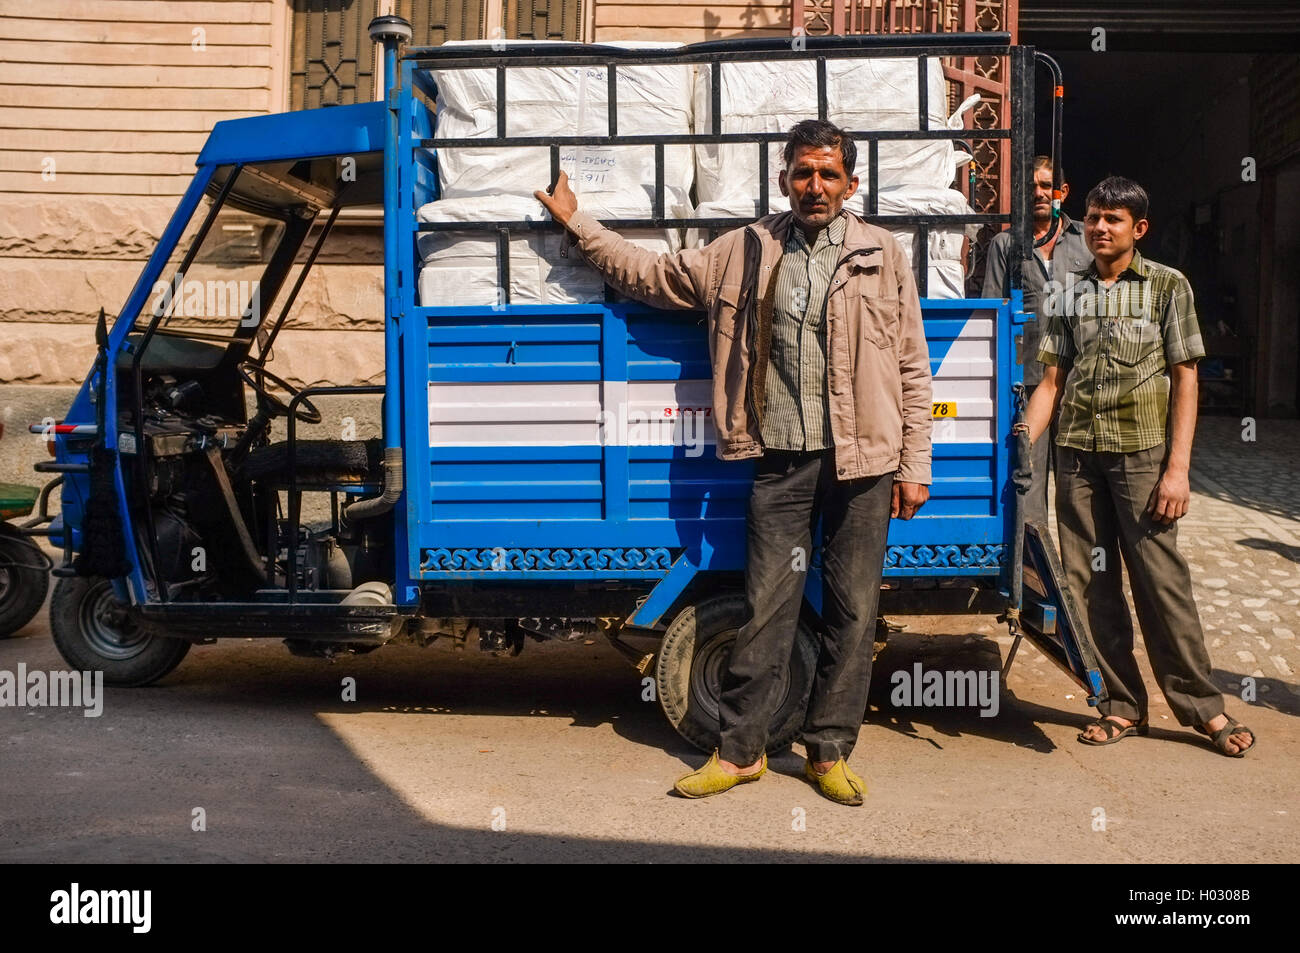 JODHPUR, INDIA - 10 FEBRUARY 2015: Men stand next to delivery three-wheeler with cargo in the back. Stock Photo